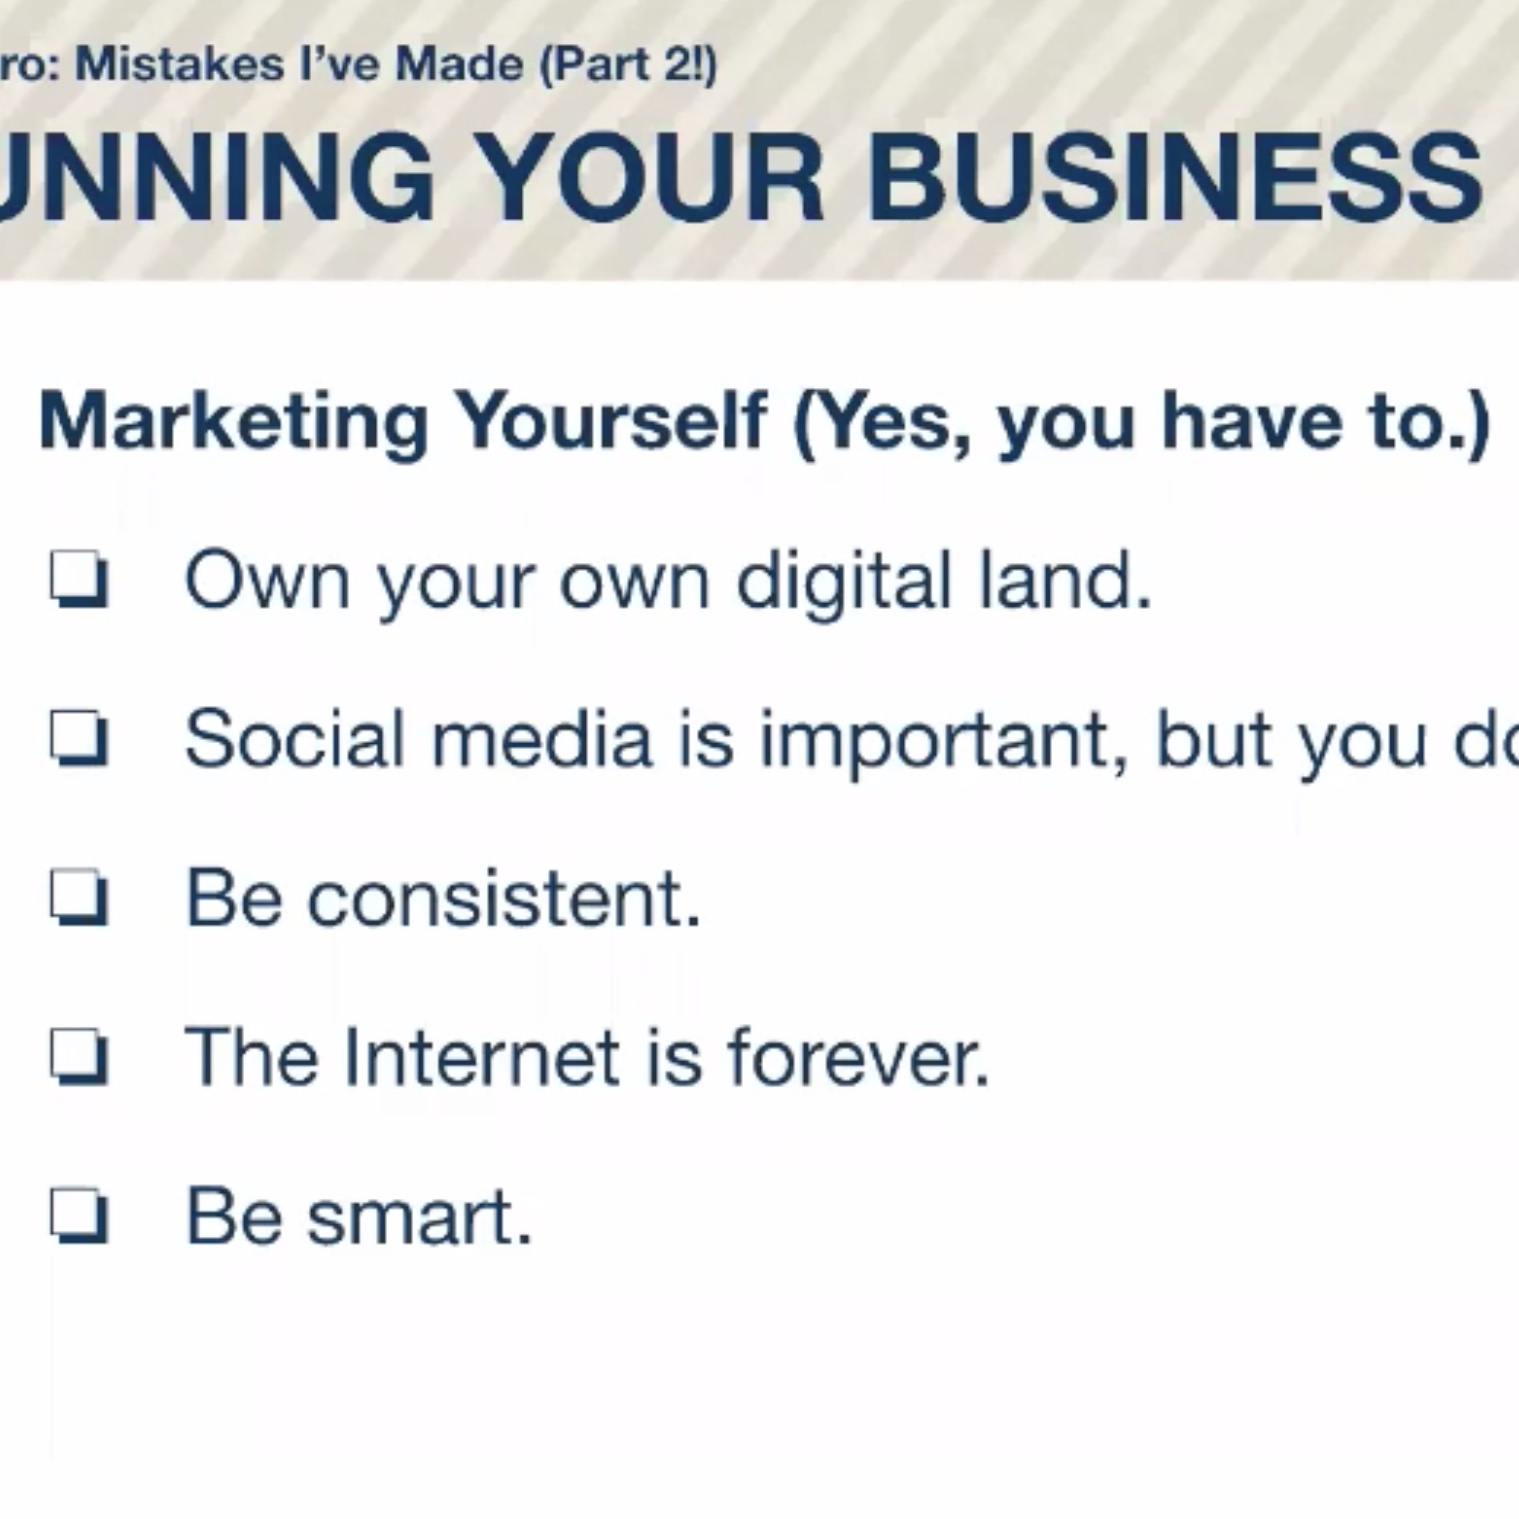 screenshot from the webinar showing a bulleted list of marketing steps